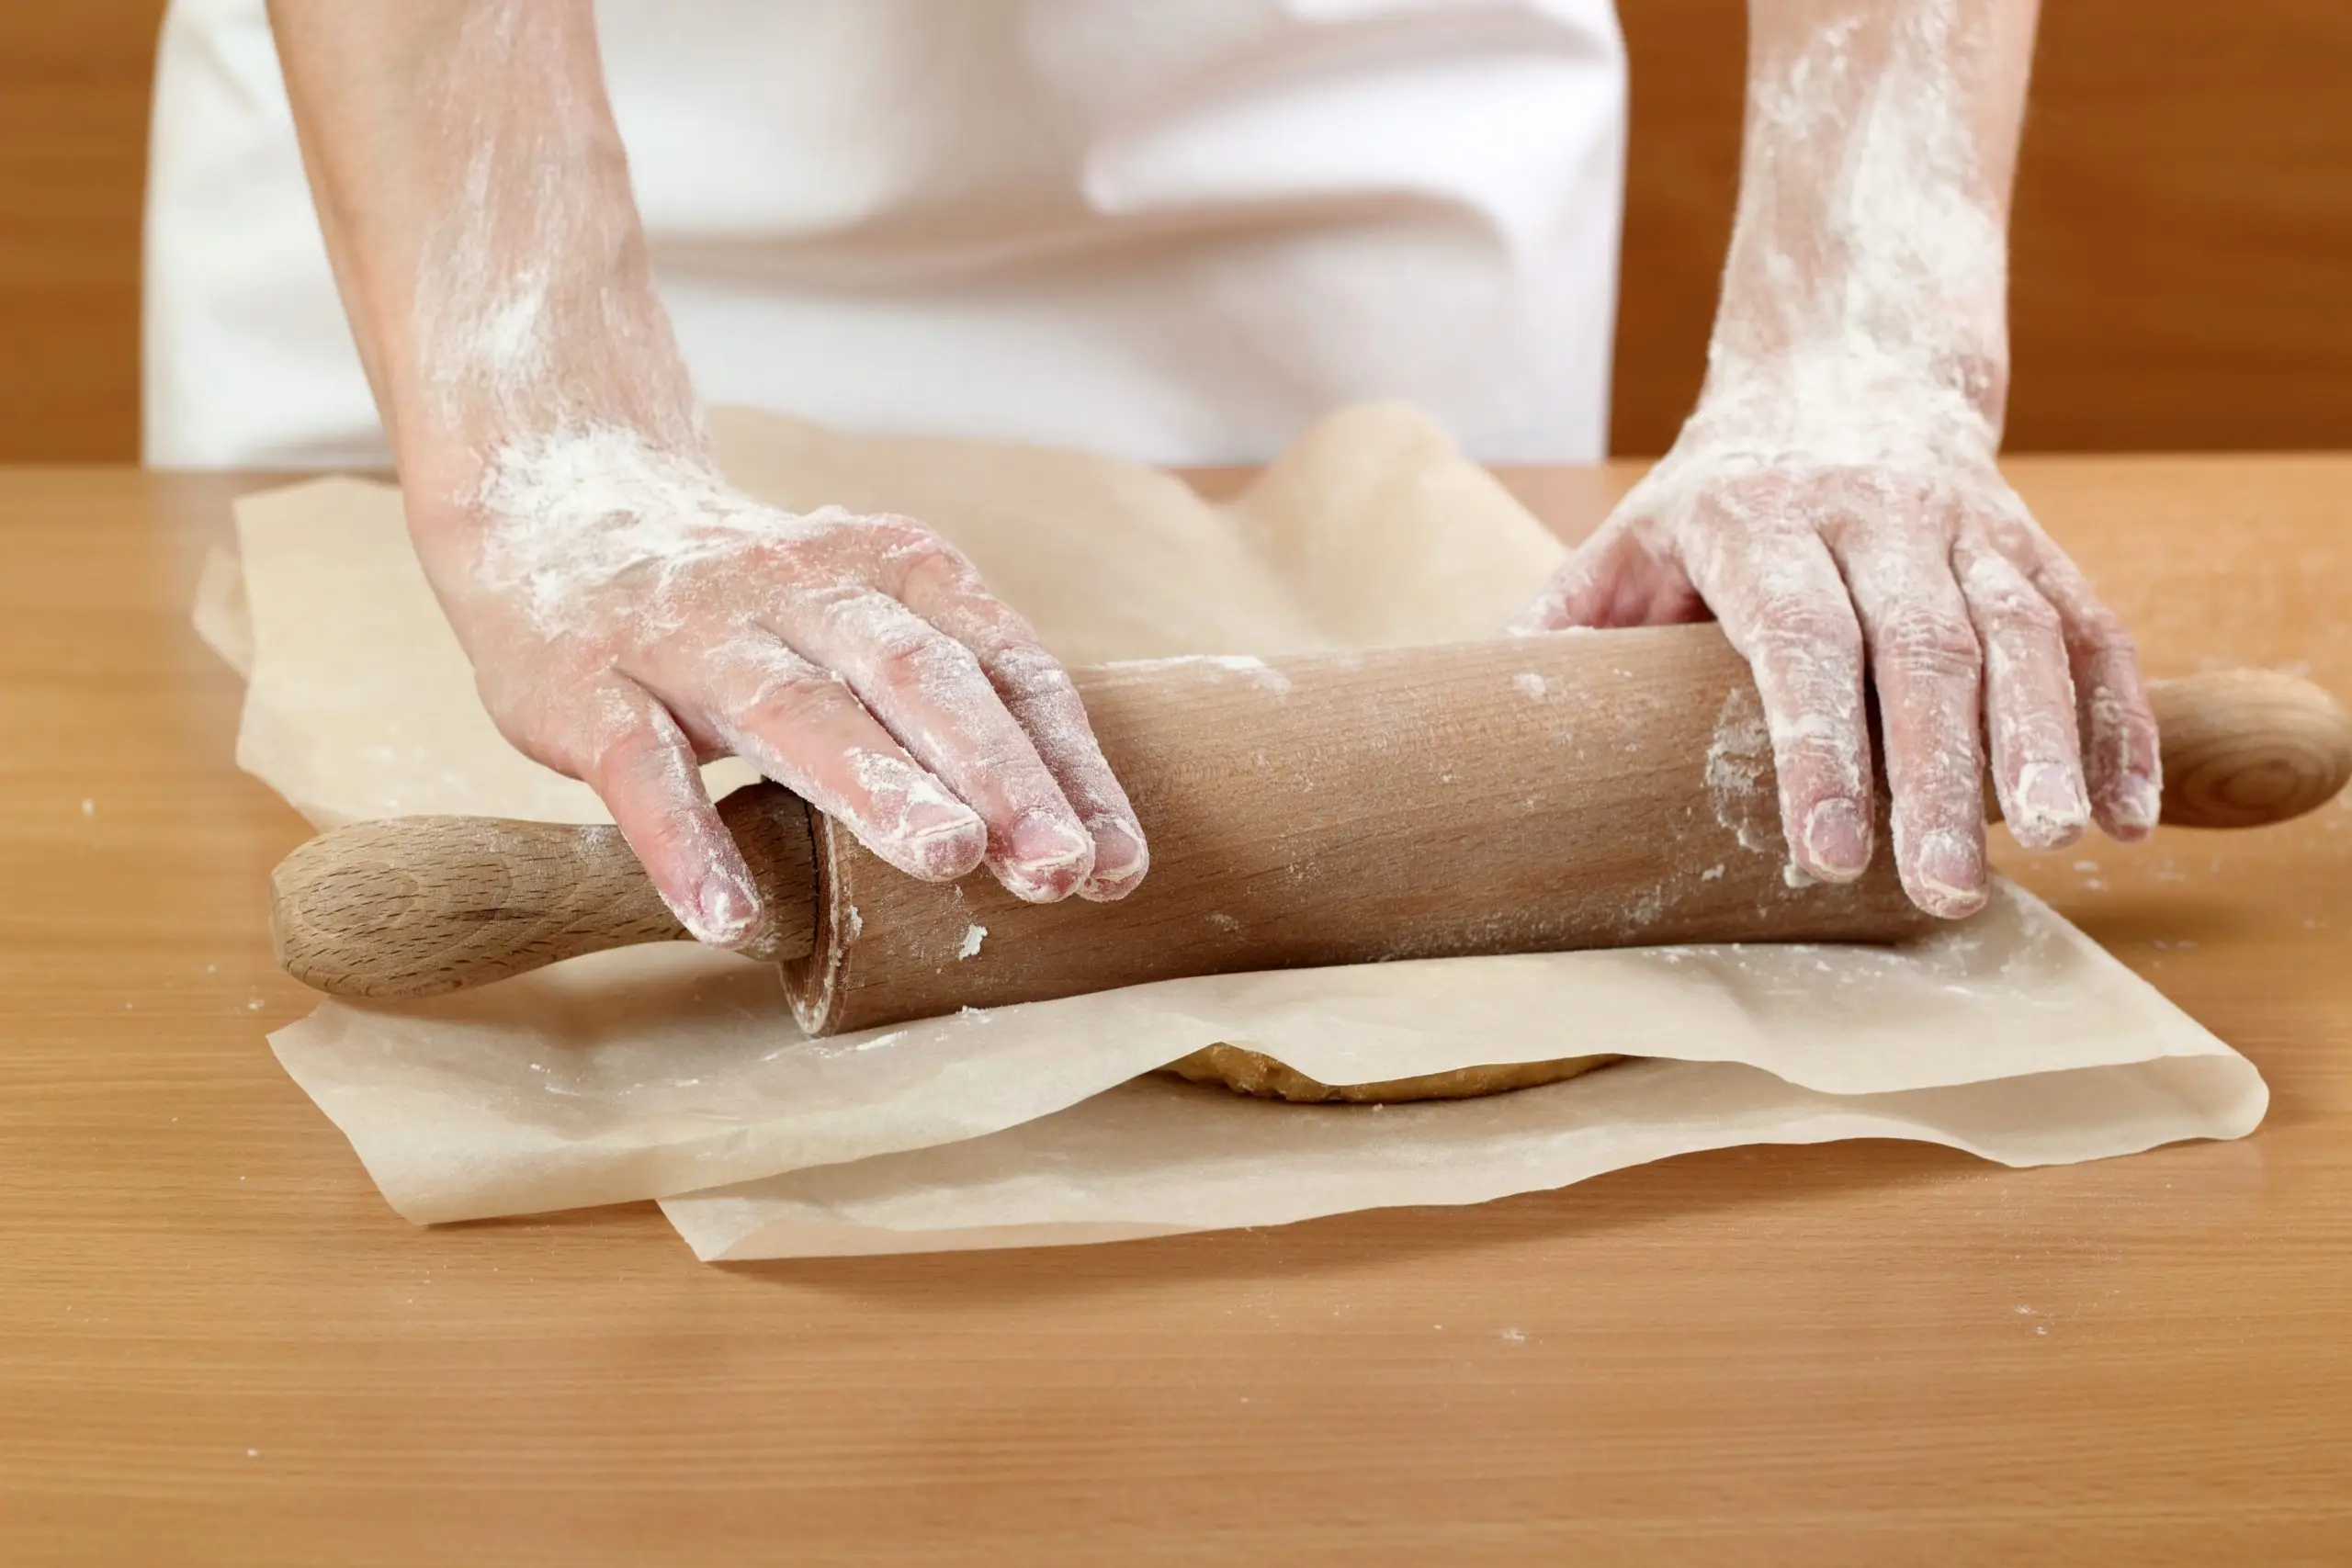 What Is The Difference Between Baking Paper And Greaseproof Paper?